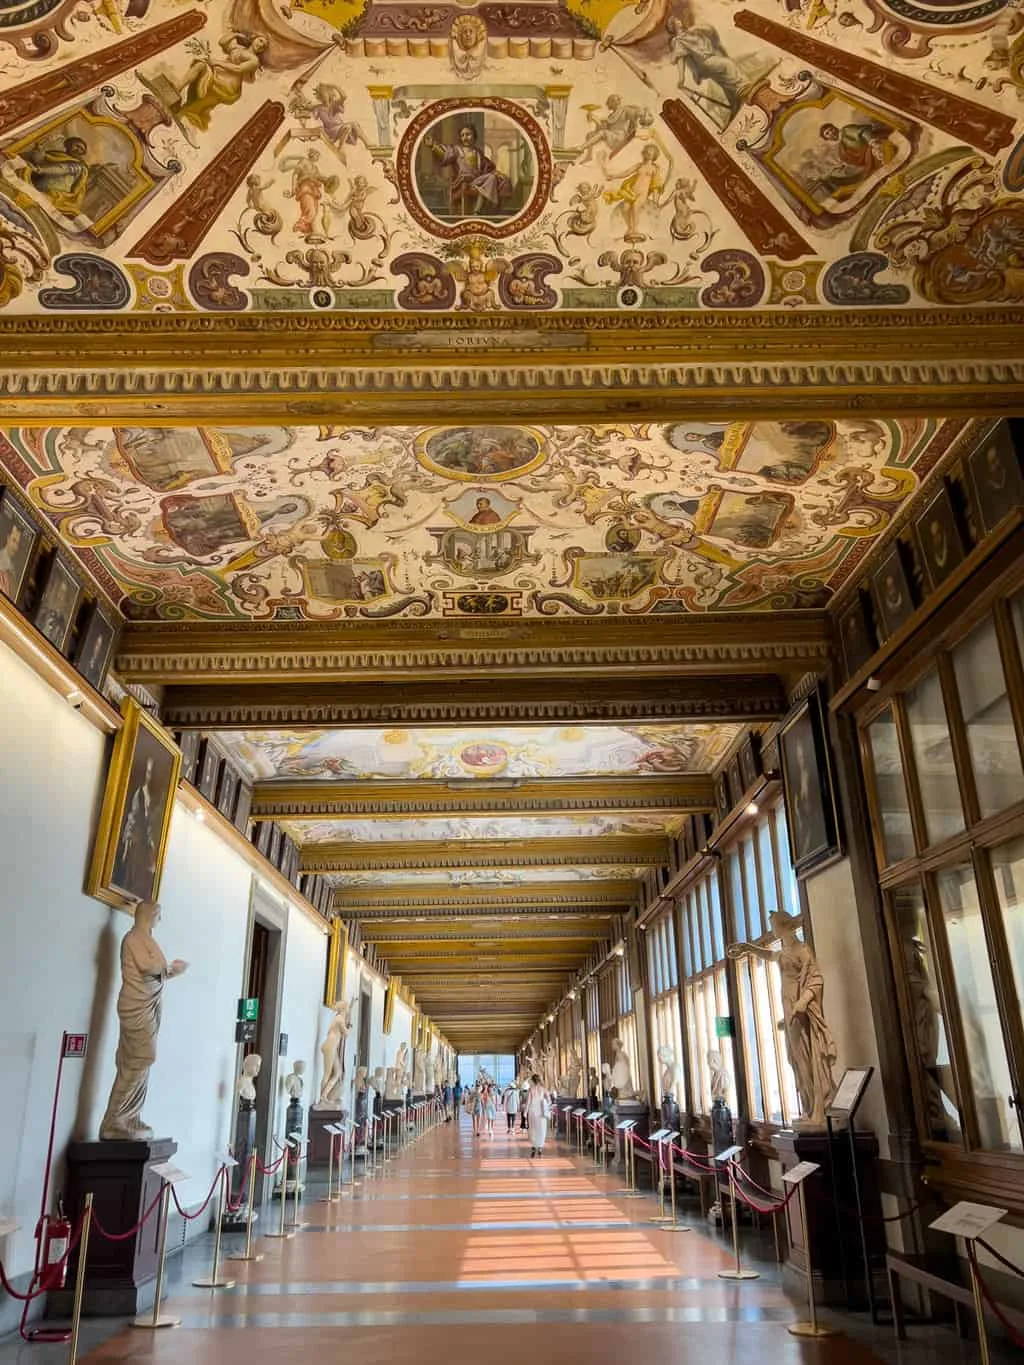 A long corridor in the Uffizi Museum in Florence. There are frescos painted on the panneled ceiling with statues lining the brightly lit corridor. 